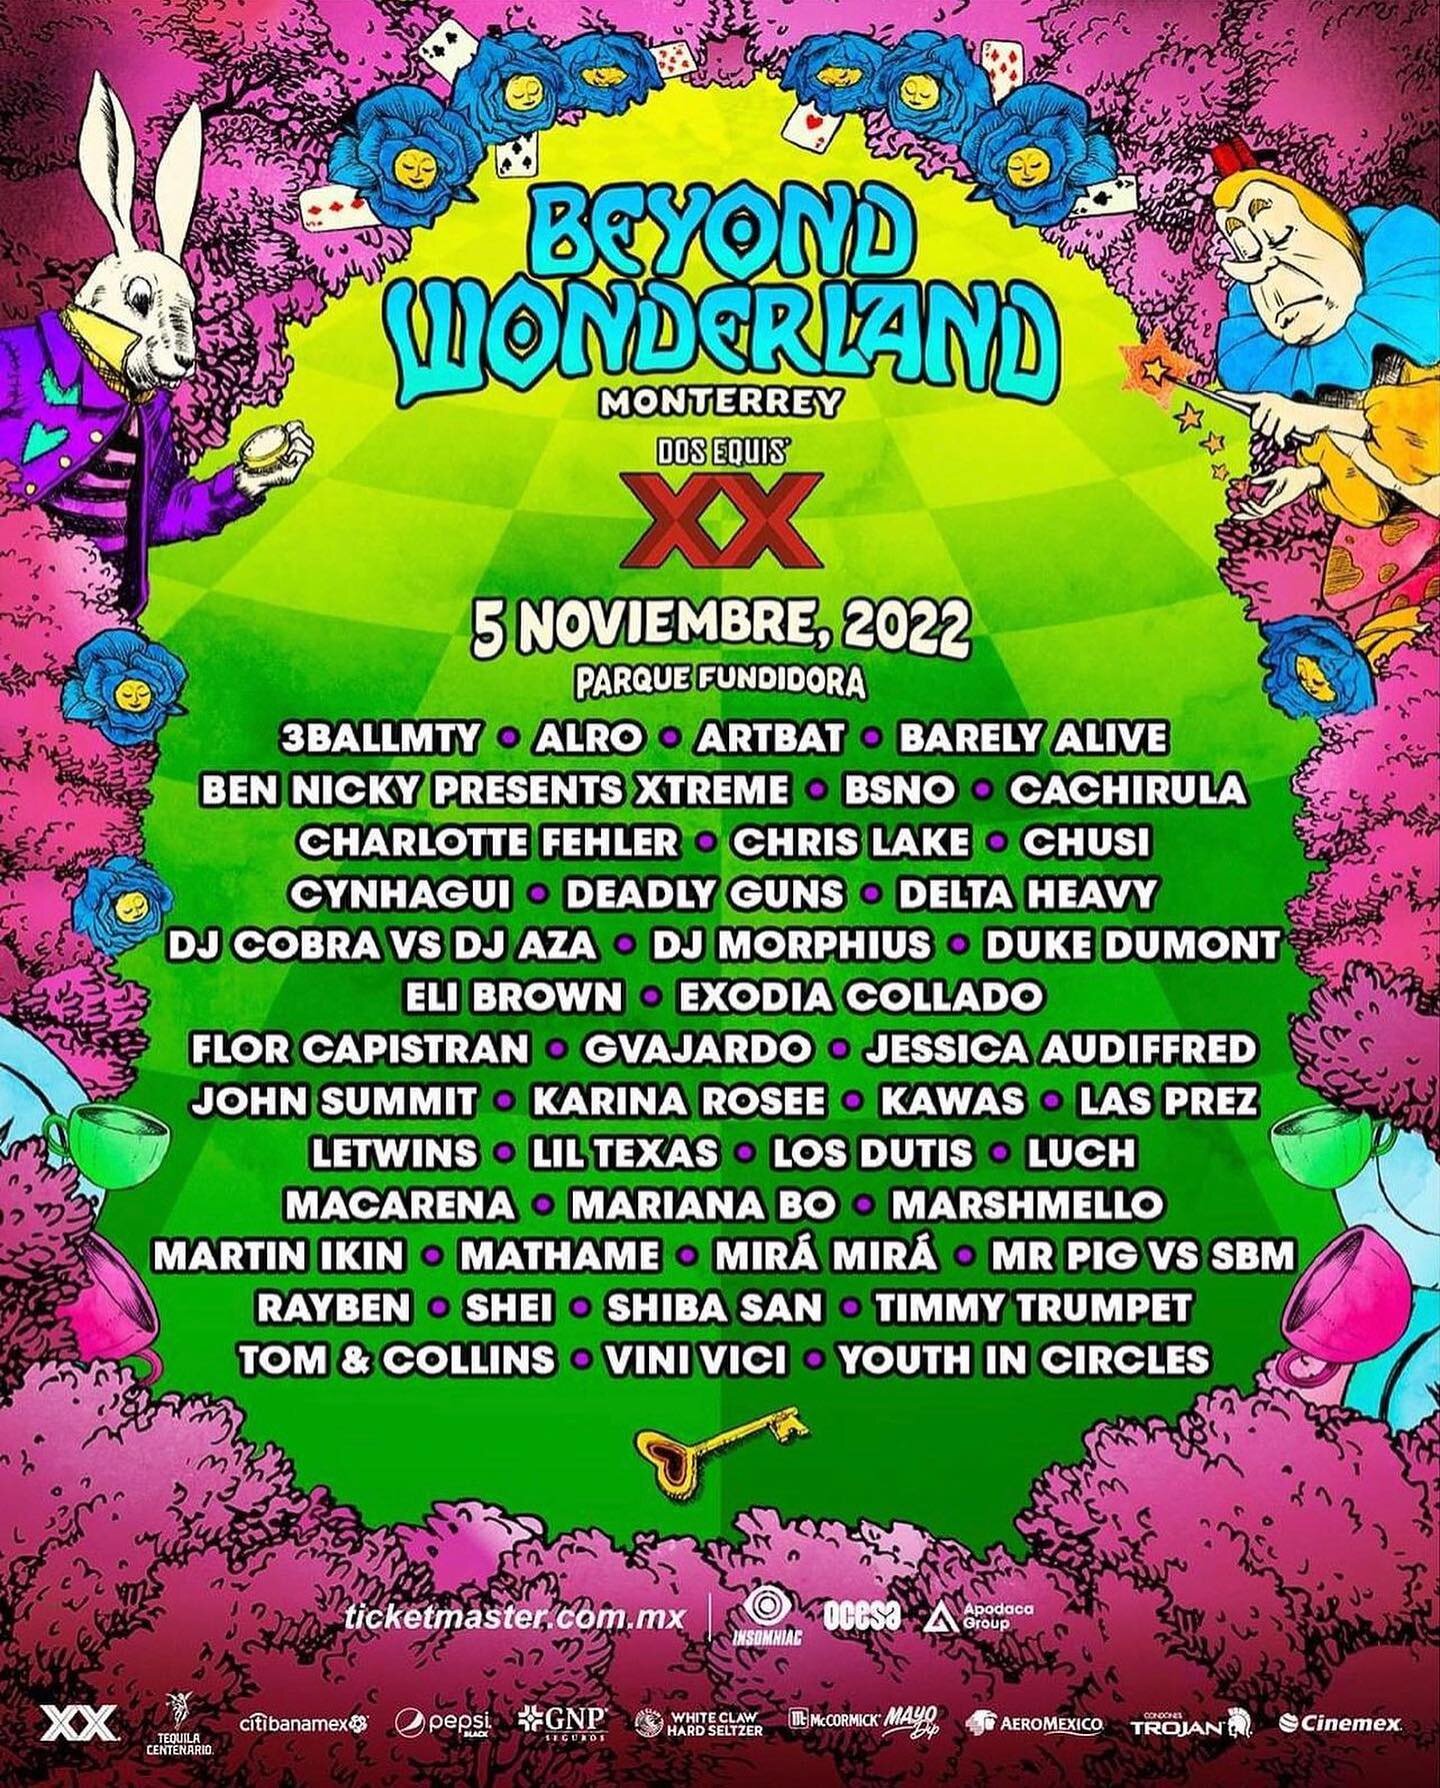 Beyond Wonderland Monterrey, Mexico this weekend! 

Find @jessica_audiffred and @youthincircles at the &lsquo;Mad Hatters Castle&rsquo; stage!